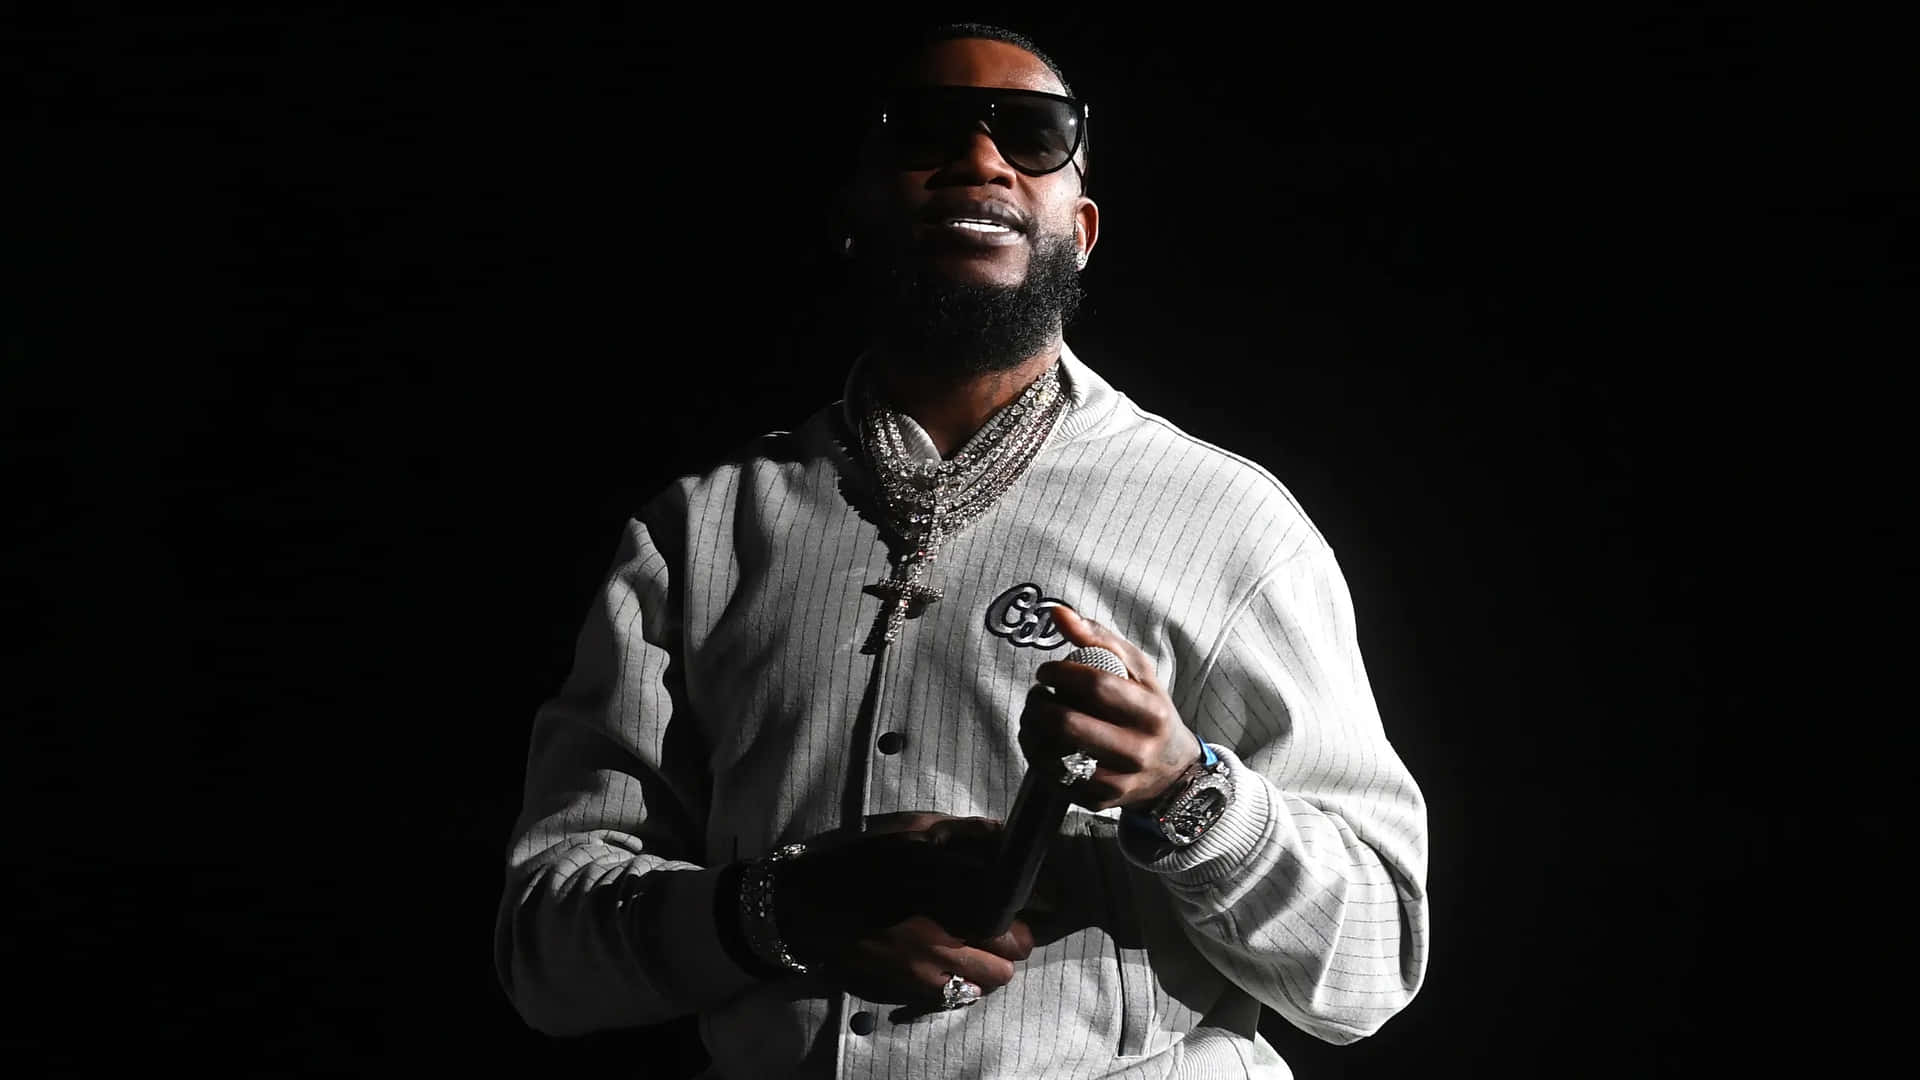 Gucci Mane Smilingwith Champagne